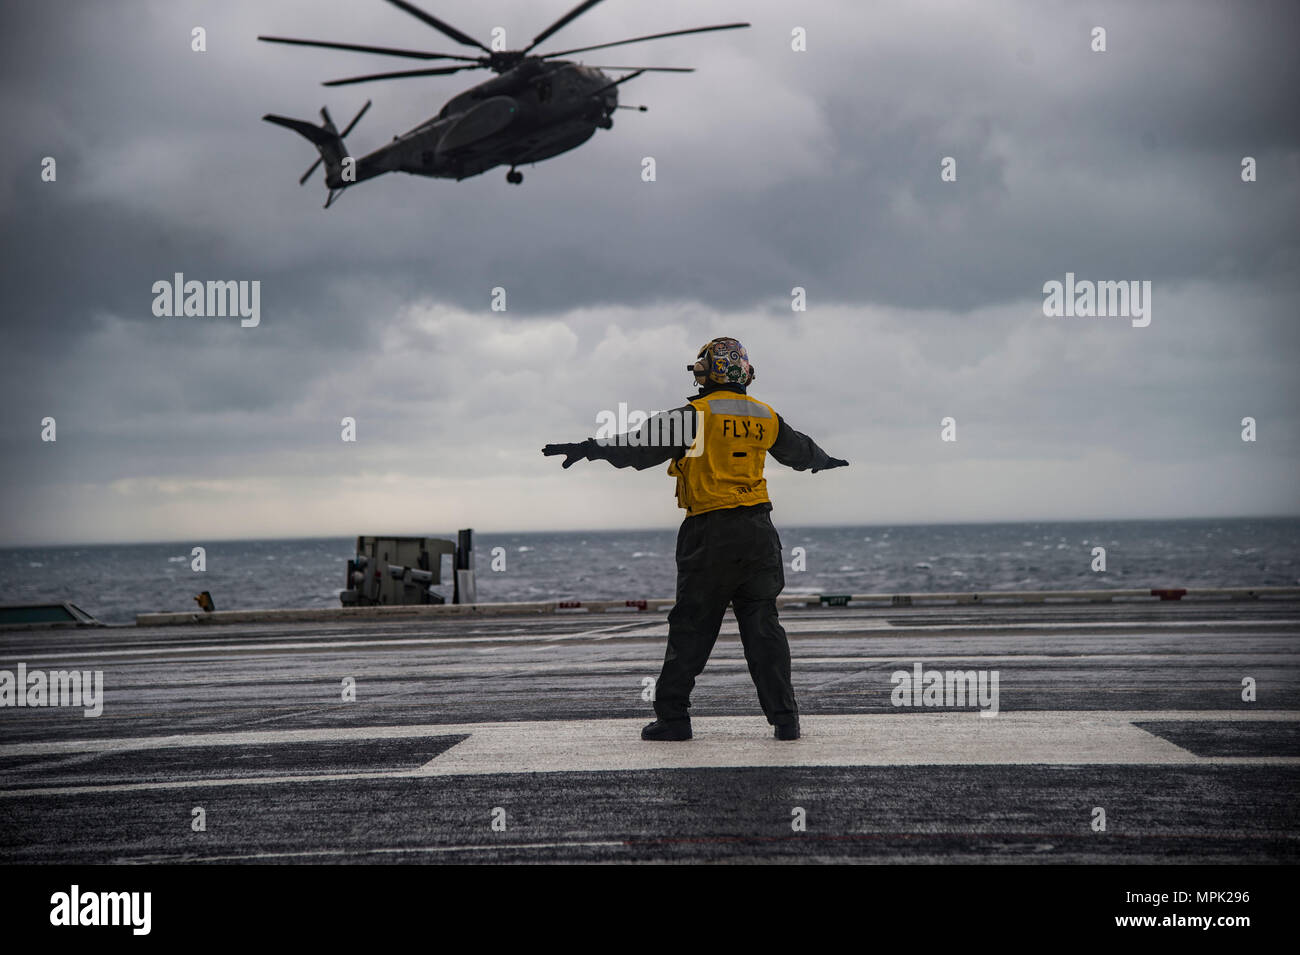 170208-N-OS569-042    ATLANTIC OCEAN (Feb. 8, 2017) Aviation Boatswain’s Mate 3rd Class (Handling) Joshua Broadbent directs an MH-53 Sea Dragon helicopter assigned to the Blackhawks of Helicopter Mine Countermeasures Squadron (HM) 15 onto the flight deck of the aircraft carrier USS Dwight D. Eisenhower (CVN 69) (Ike). Ike is currently conducting aircraft carrier qualifications during the sustainment phase of the Optimized Fleet Response Plan (OFRP). (U.S. Navy photo by Mass Communication Specialist Seaman Zach Sleeper) Stock Photo